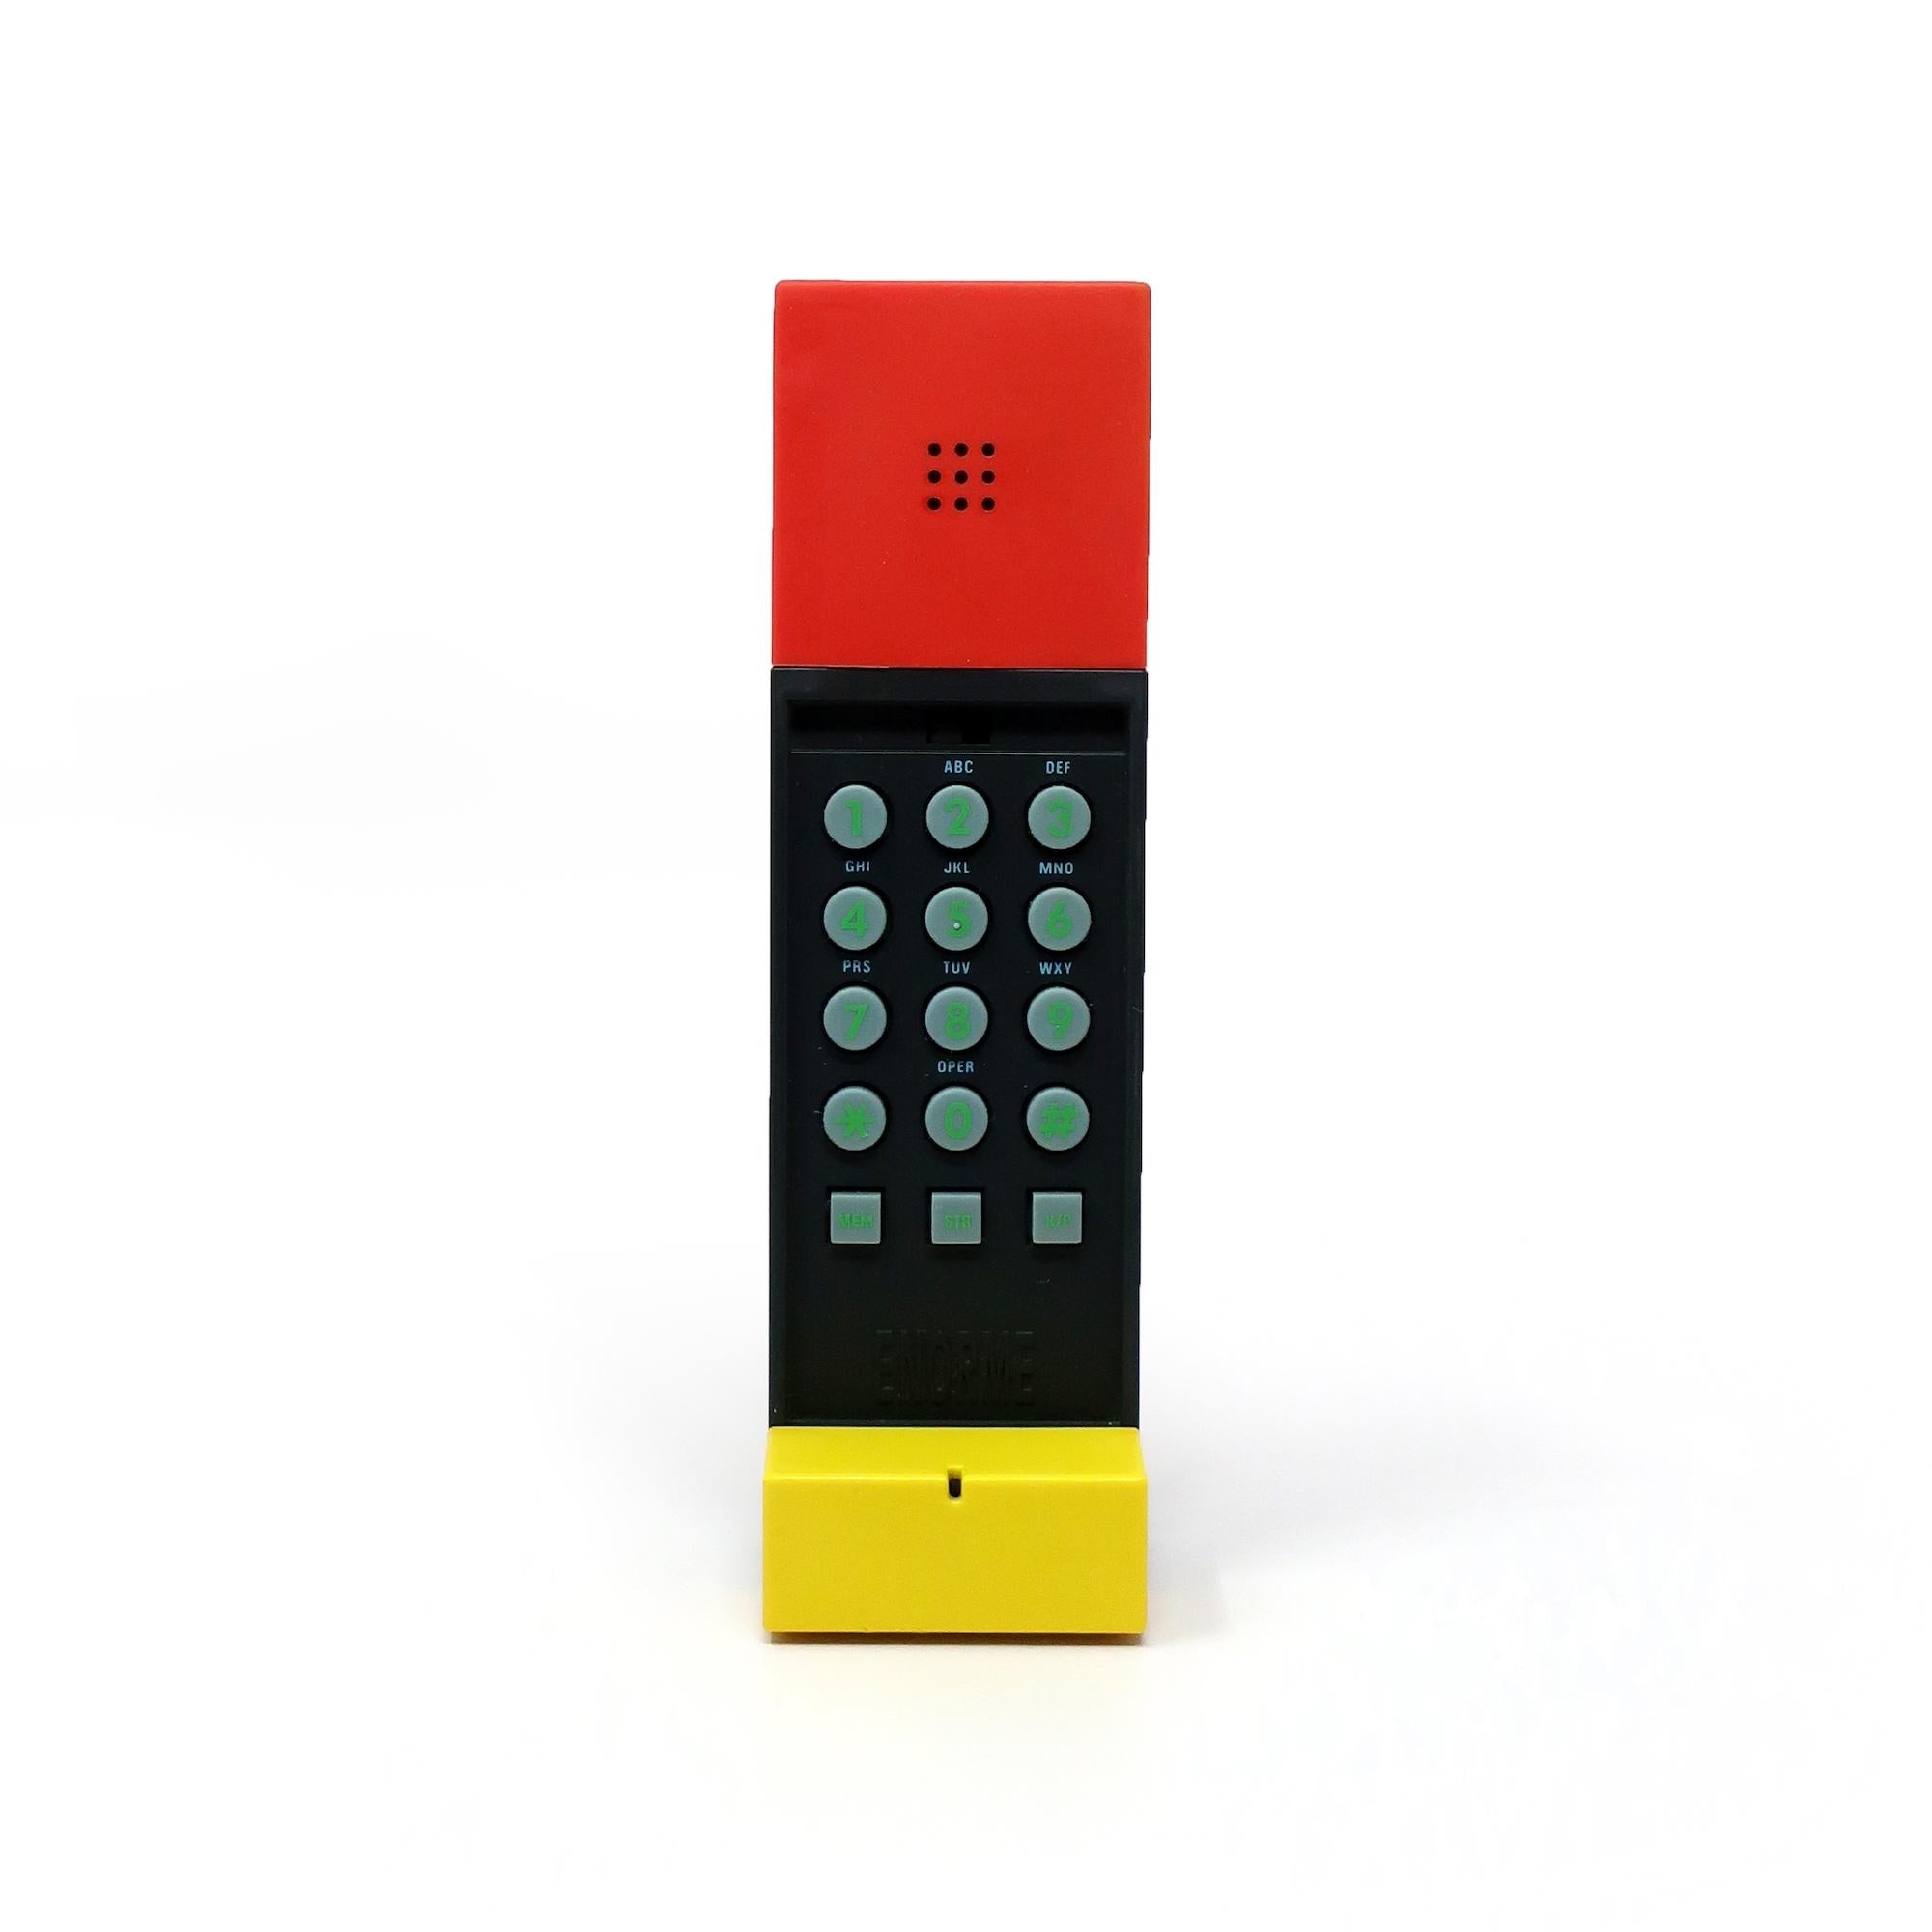 A perfectly postmodern telephone handset designed by the Memphis Milano master, Ettore Sottsass, and produced in 1986.  The Enorme telephone was the result of a collaboration between Sottsass and David Kelley, founder of the design firm IDEO.